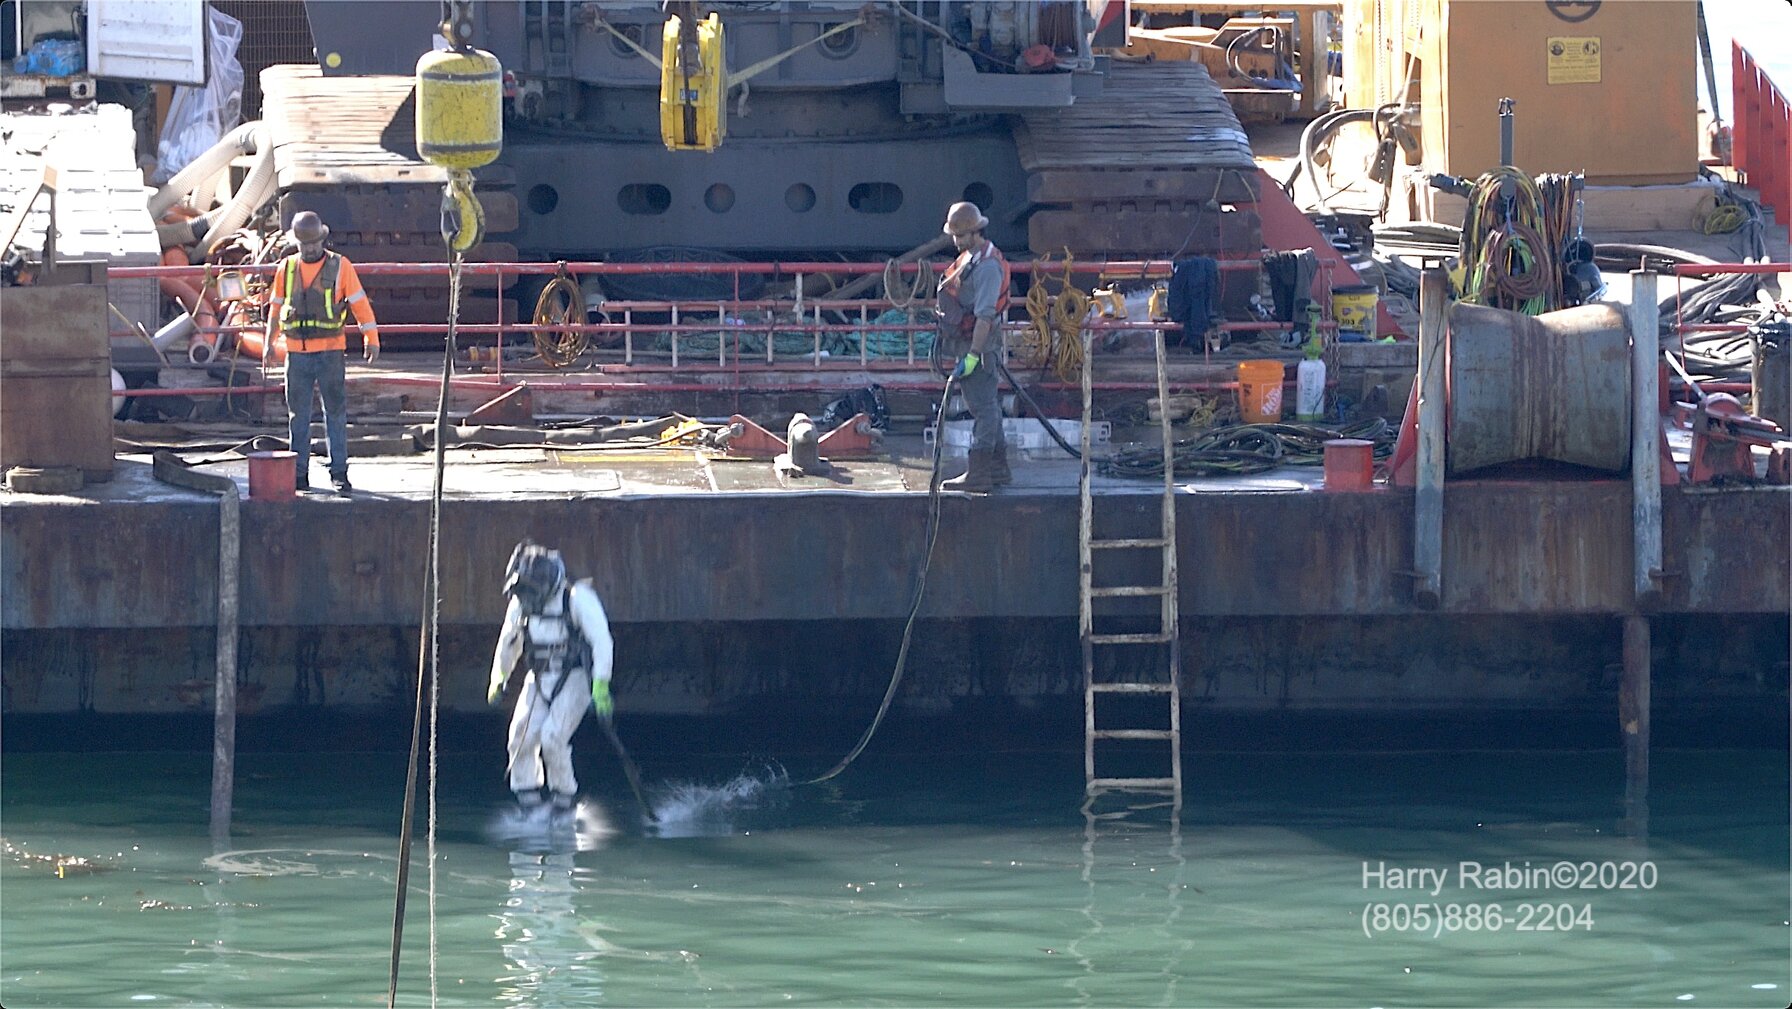  Harry Rabin captured the oilfield divers working from the Barge to prepare the NorthStar well for the  pumping of cement into the pipe encasing the well . 